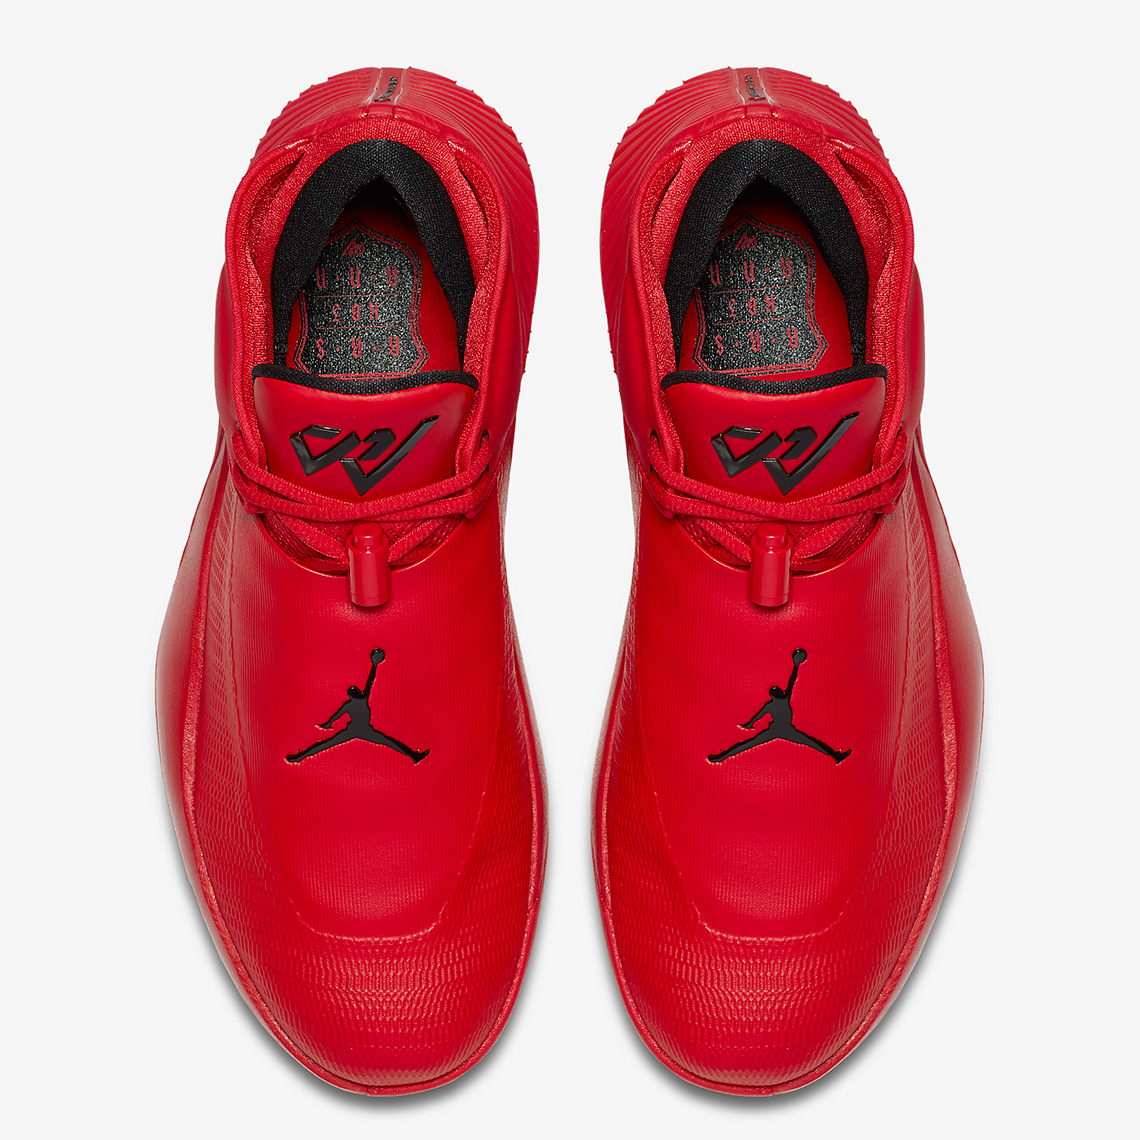 russell westbrook shoes red